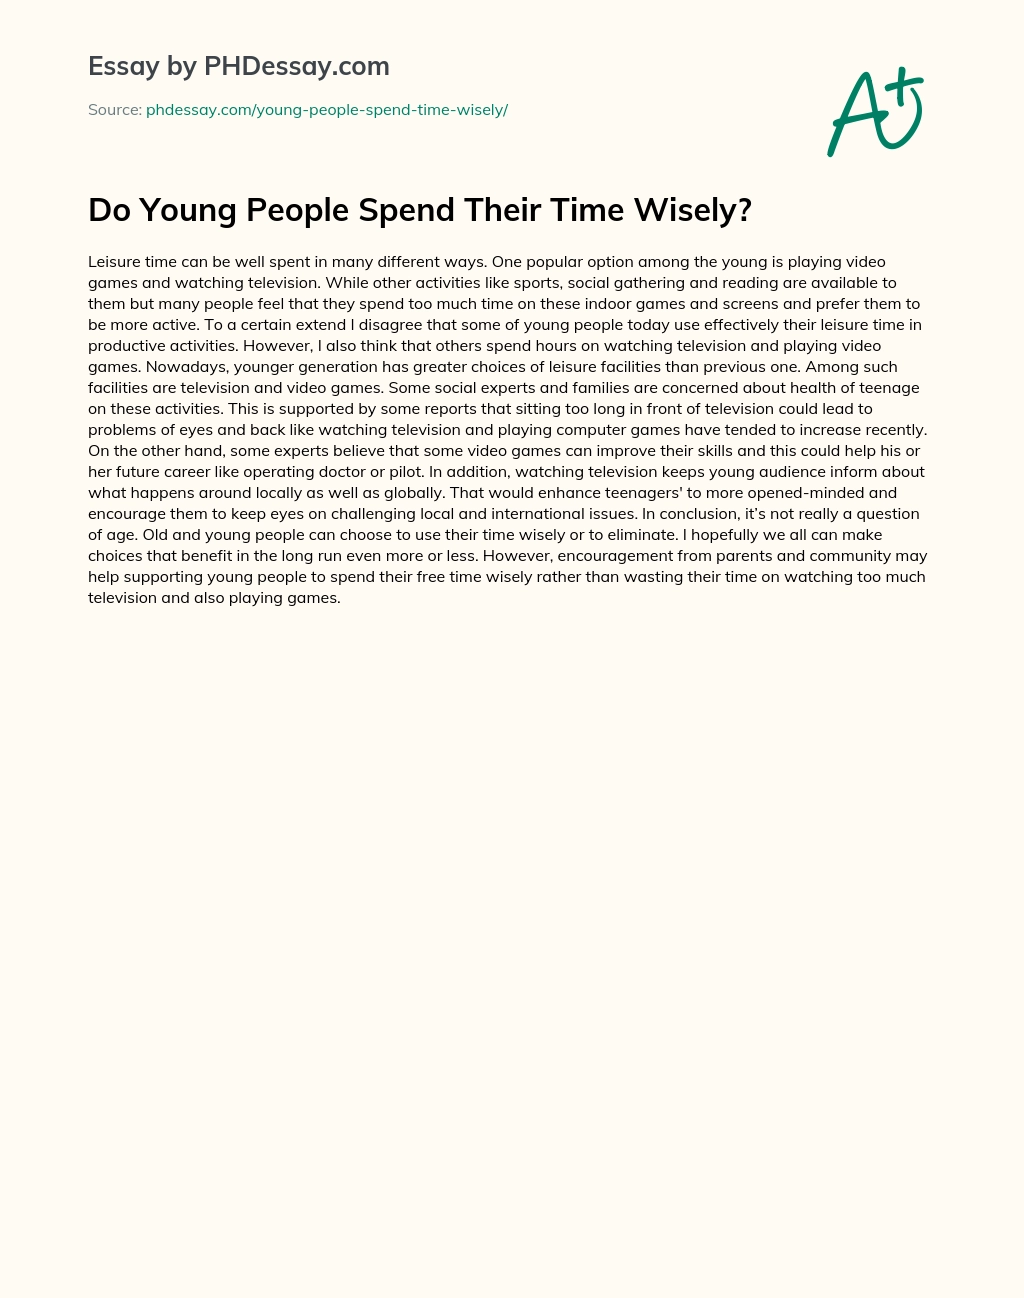 Do Young People Spend Their Time Wisely? essay